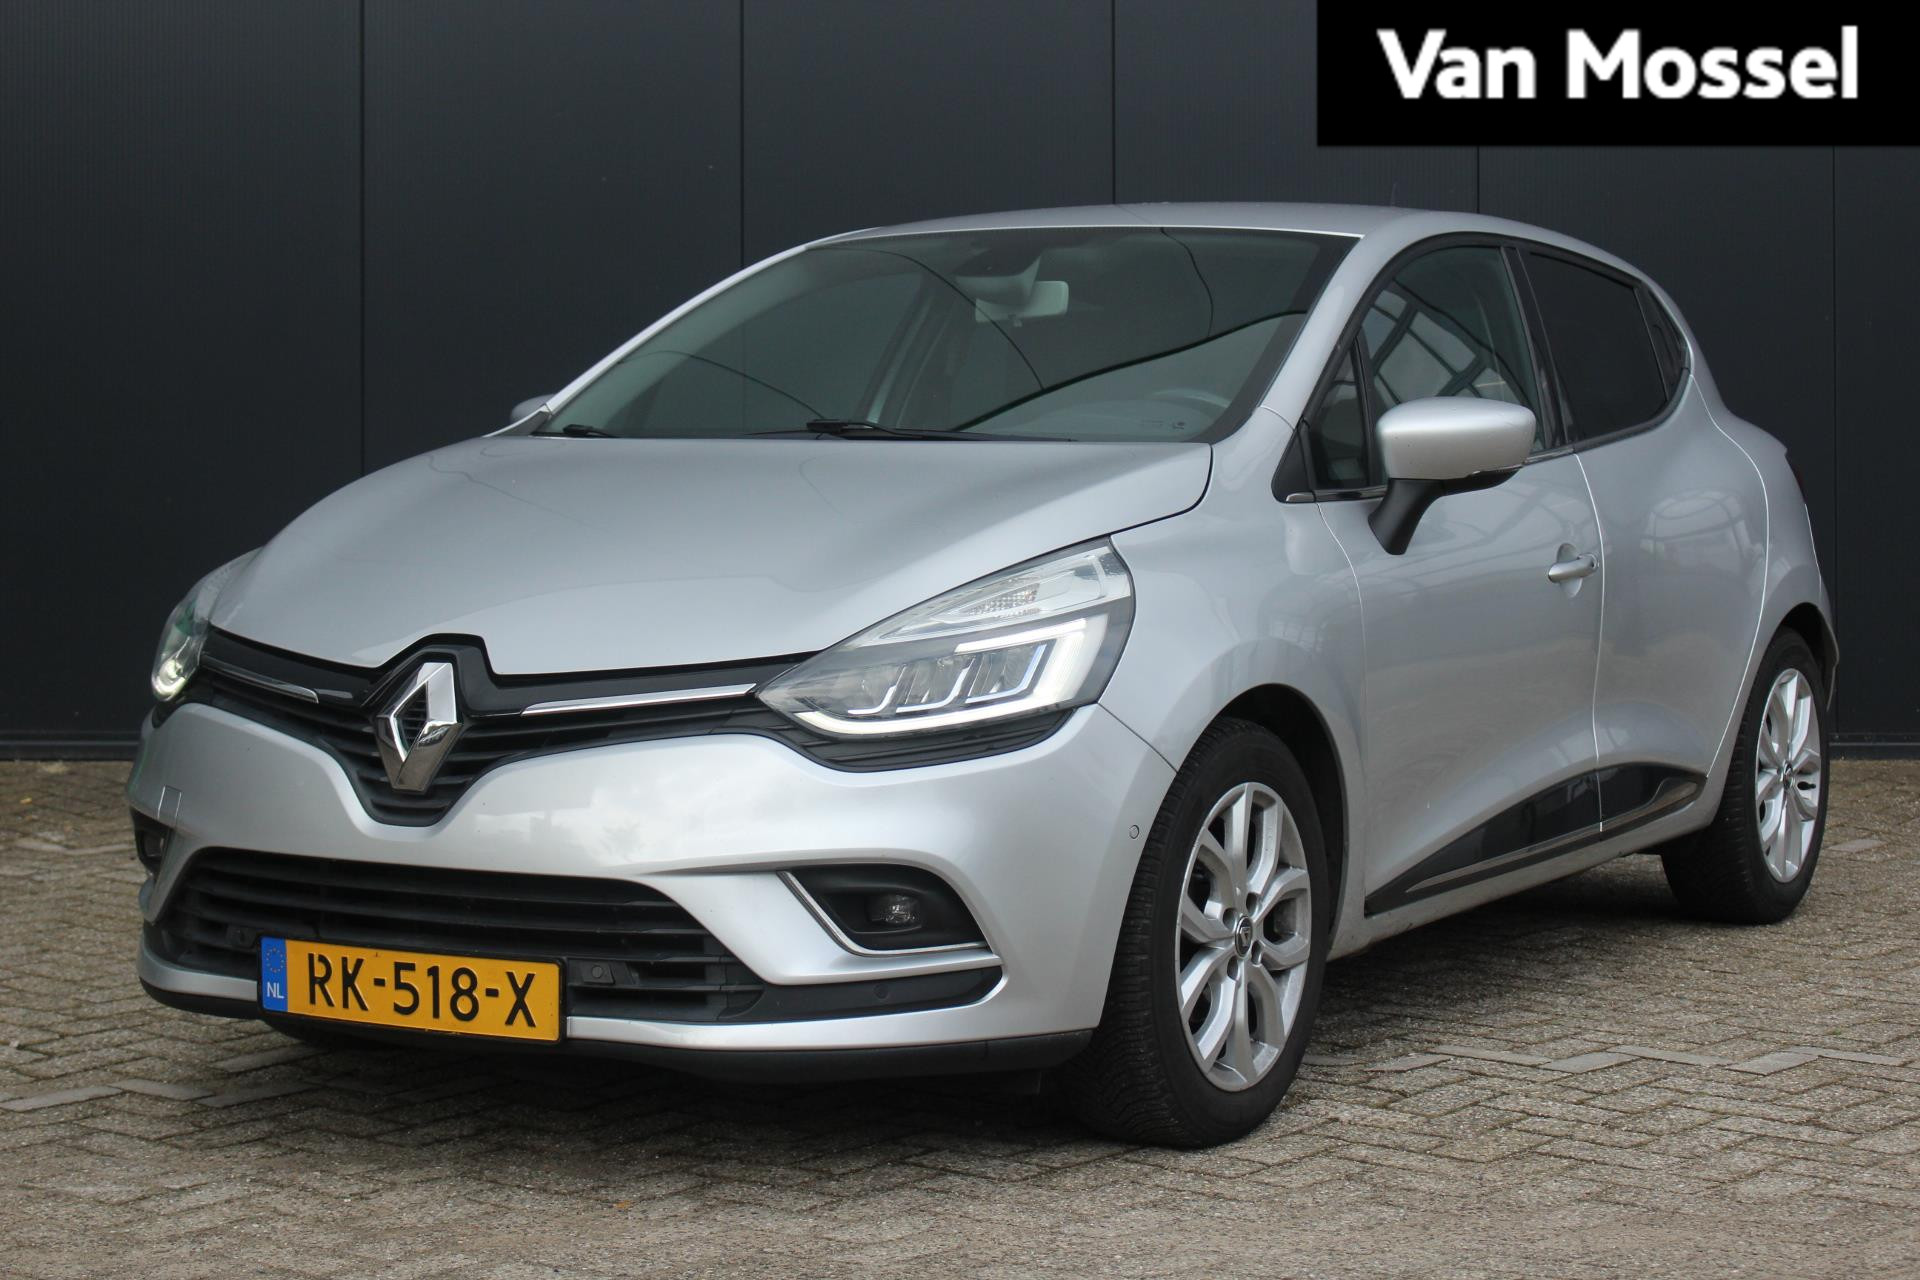 Renault Clio 0.9 TCe 90Pk Intens | Navigatie | Climate Control  | Parkeersensoren Voor & Achter | Achteruitrijcamera | Privacy Glass | Cruise Control | Keyless Entry | Privacy Glass |